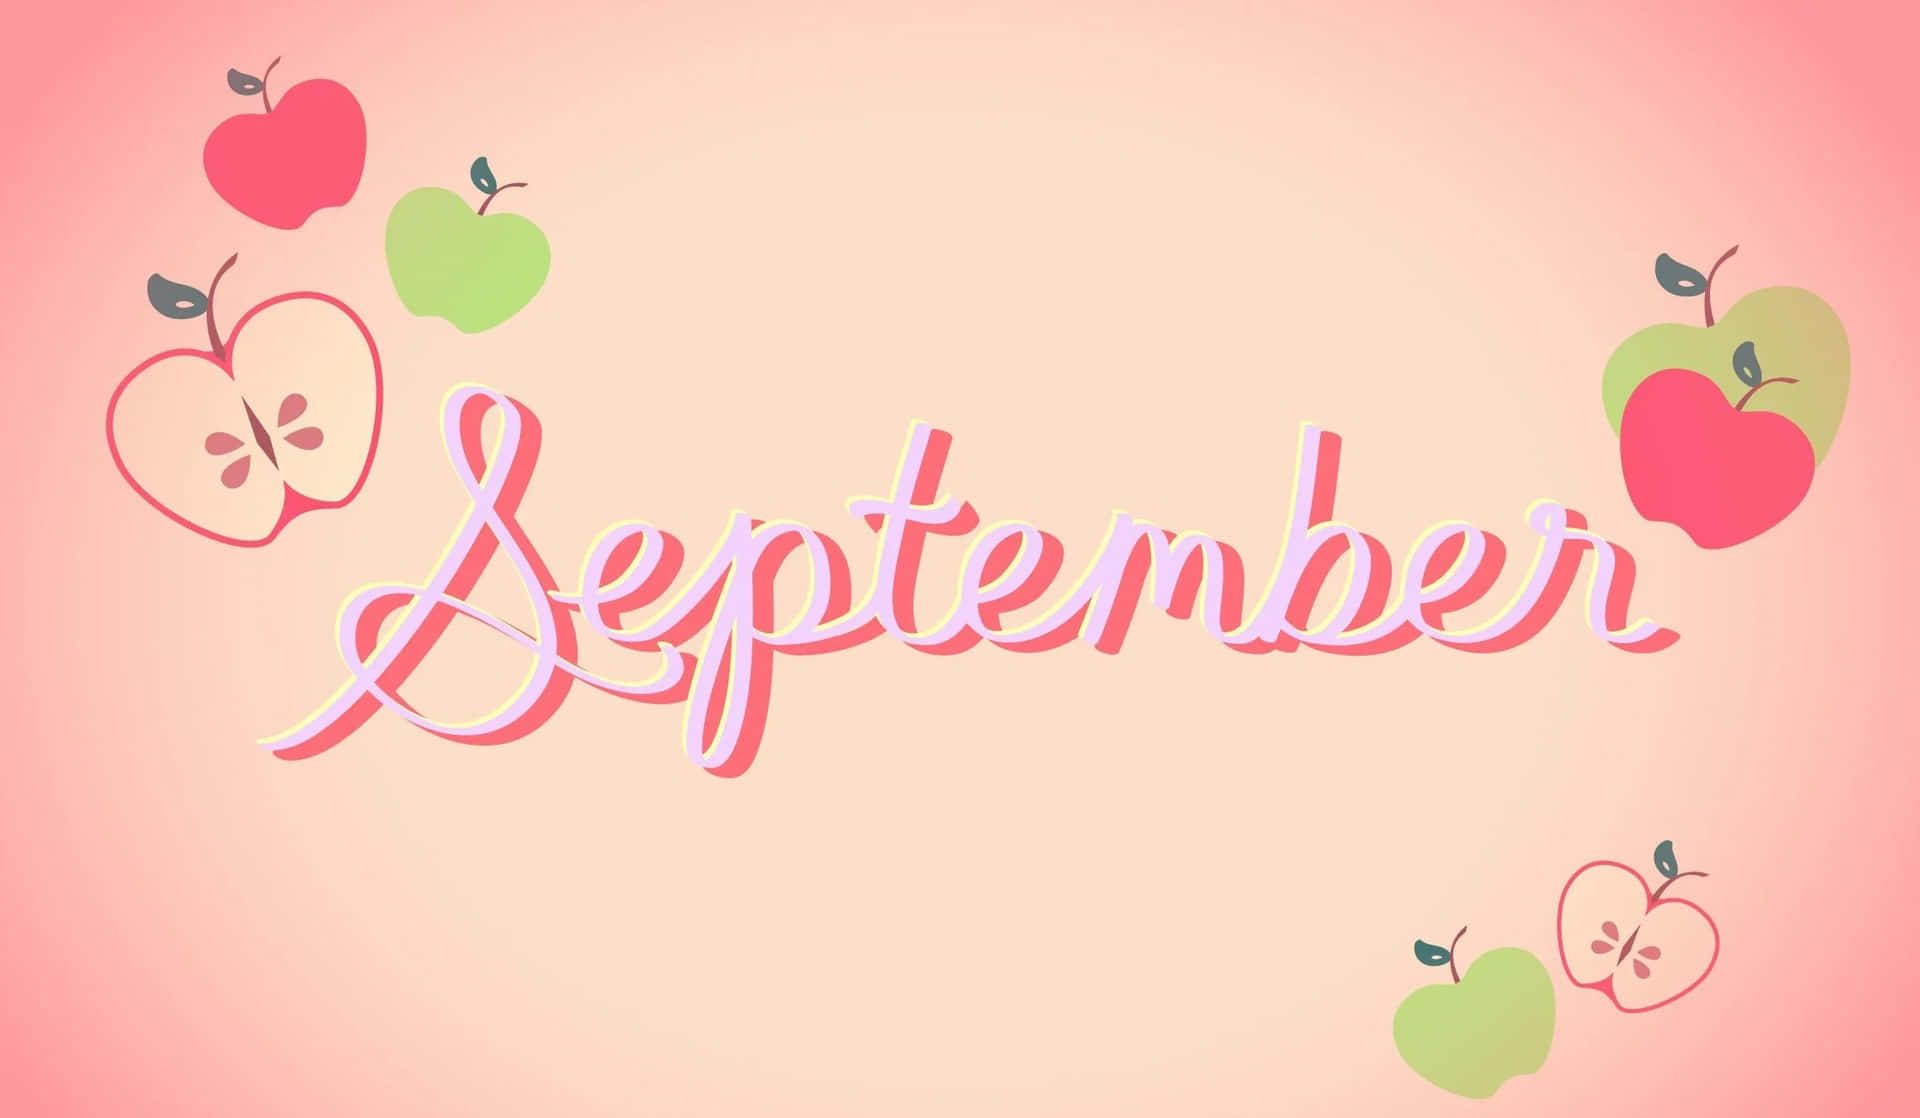 Welcome to September, a time of magical beauty